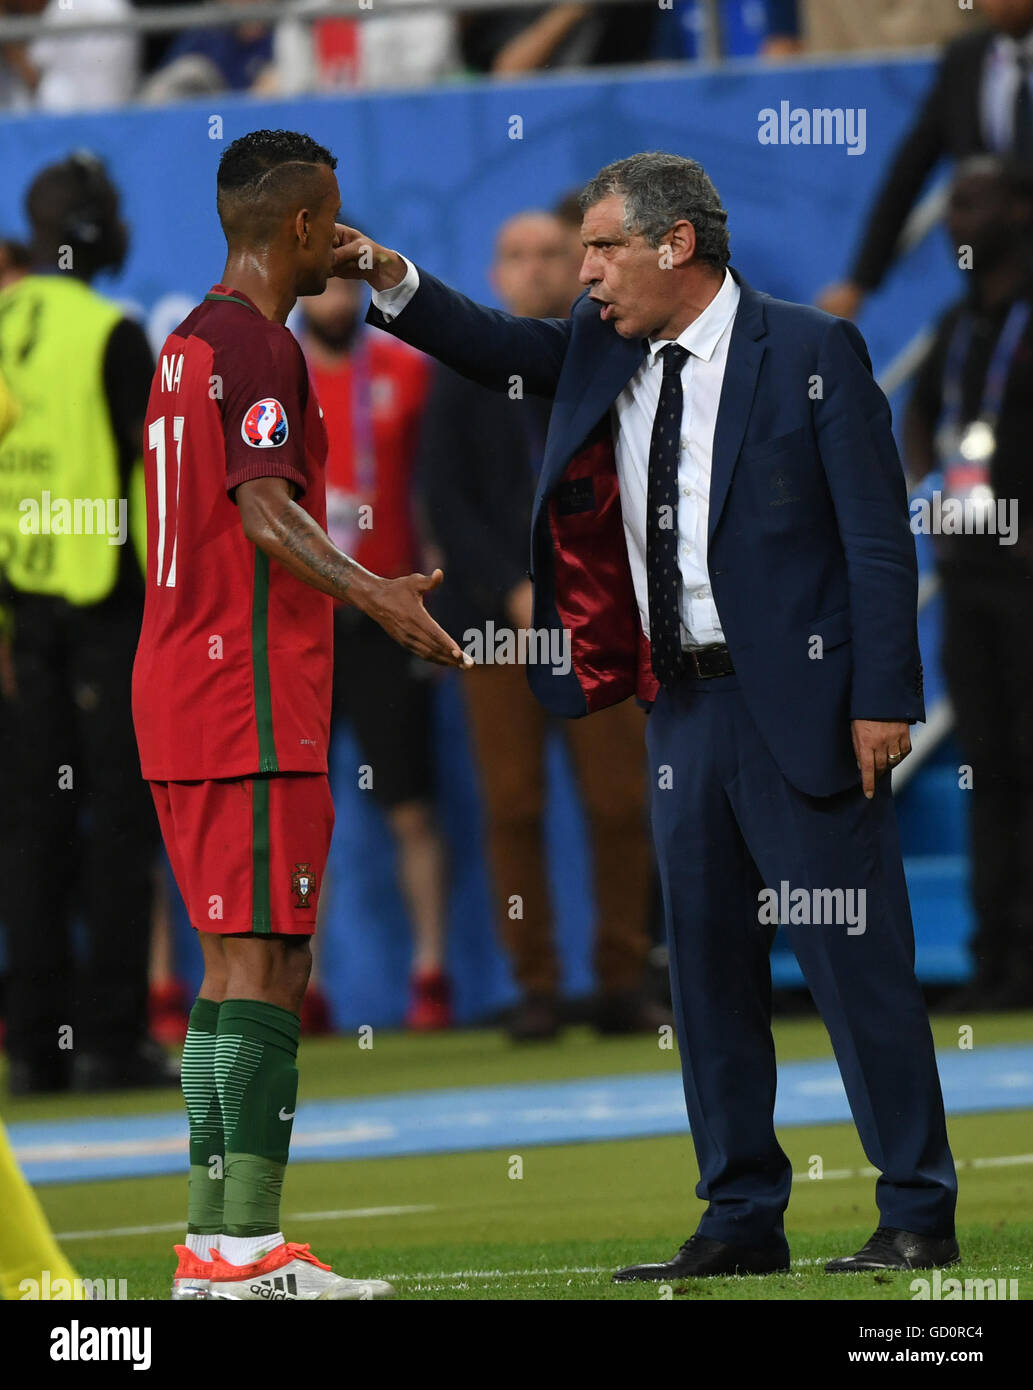 Paris, France. 10th July, 2016. Fernando Santos(R), coach of Portugal talks with Nani during the Euro 2016 final football match between Portugal and France in Paris, France, July 10, 2016. Credit:  Guo Yong/Xinhua/Alamy Live News Stock Photo